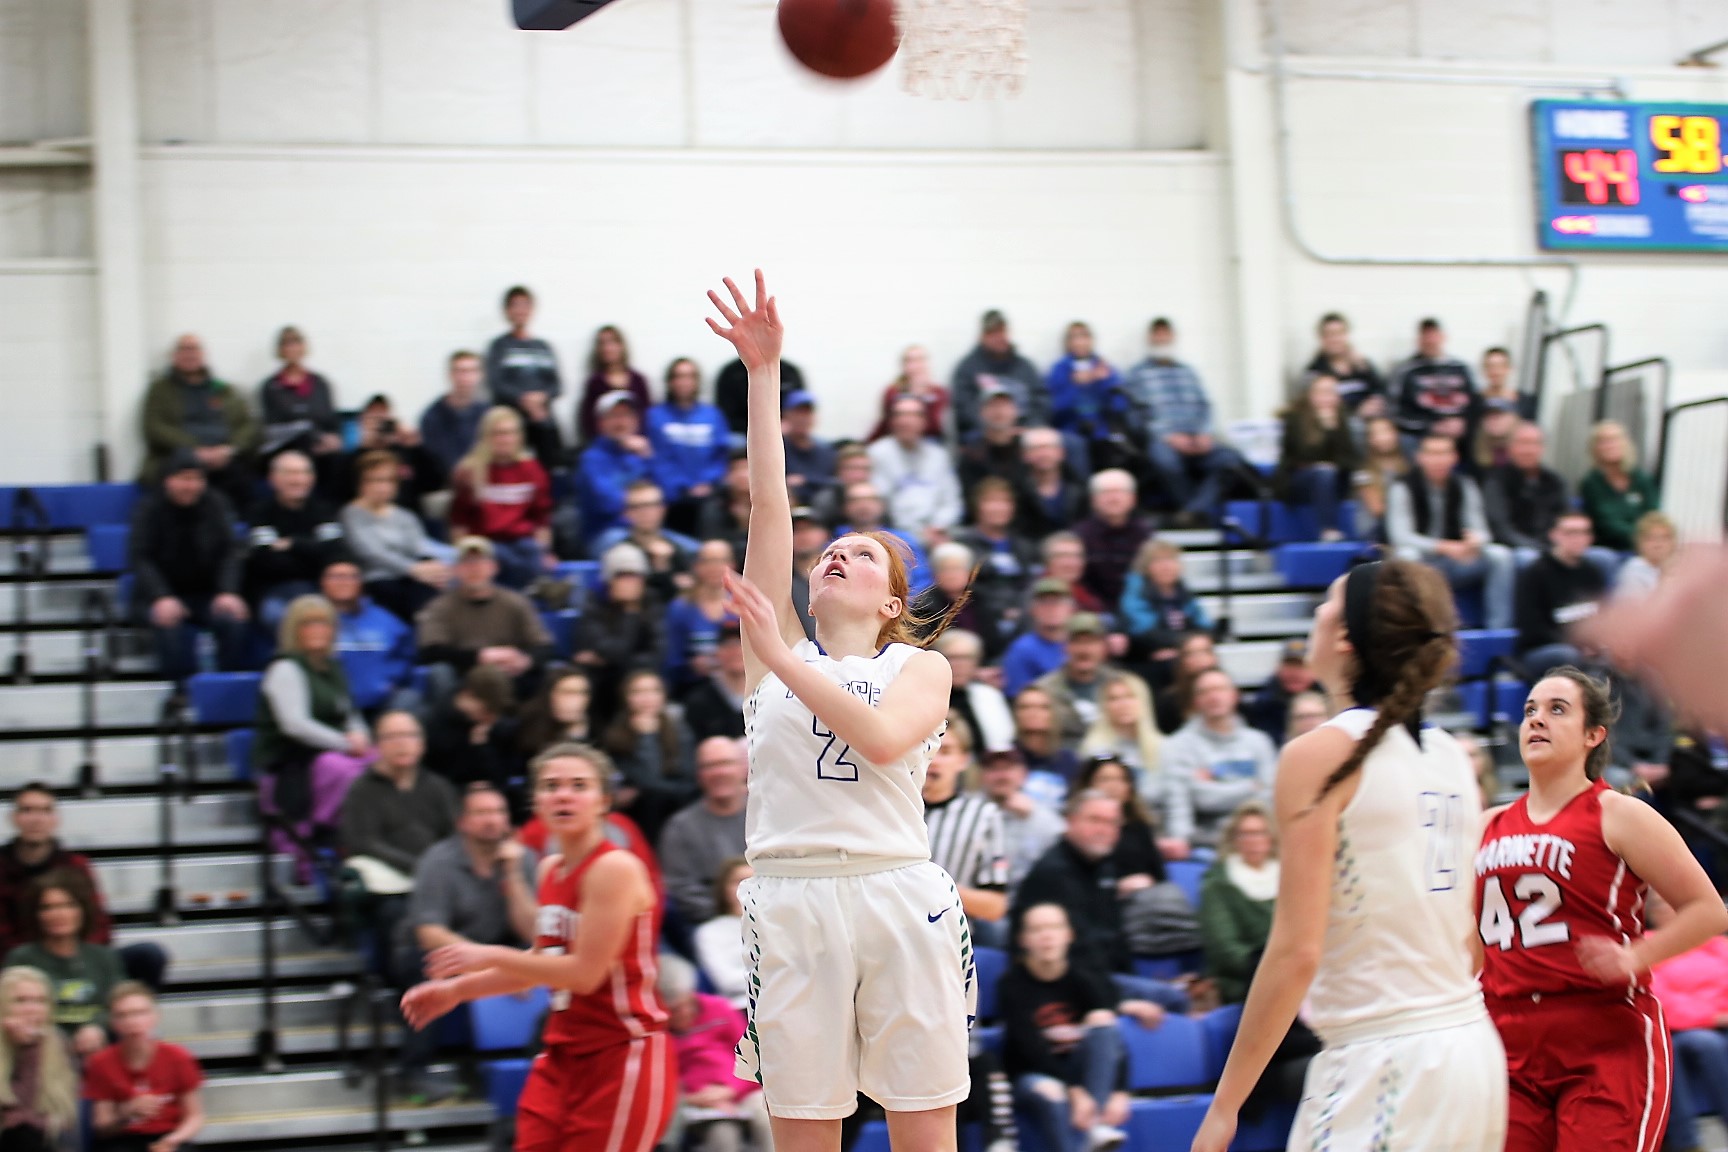 JuliAnn Wickman watches as the shot she just released goes toward the rim